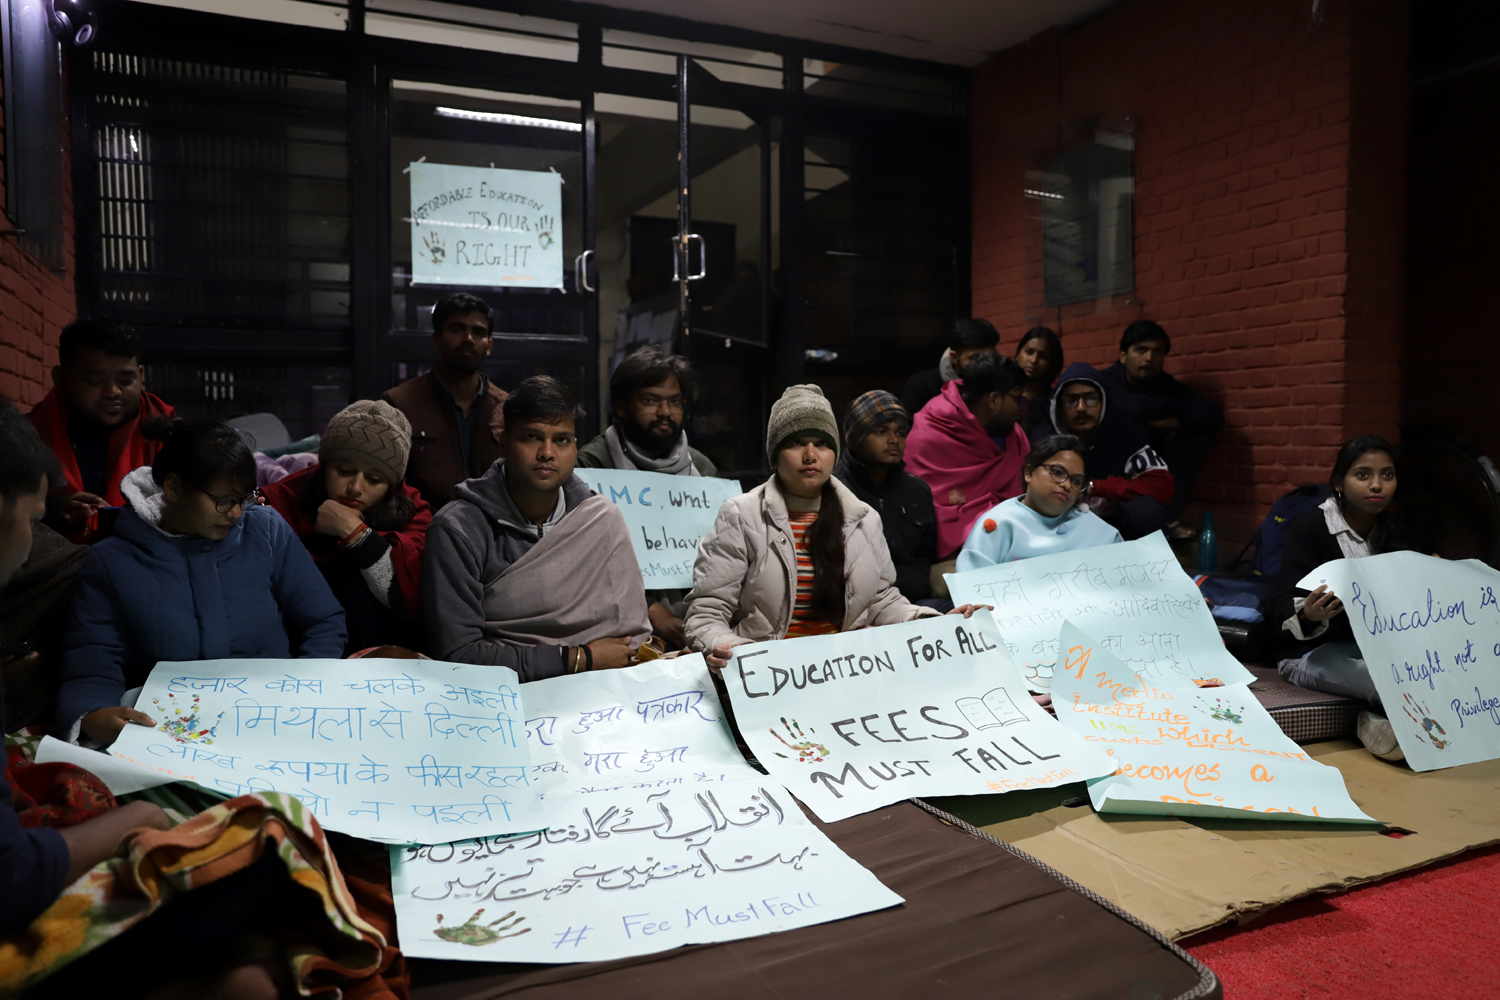 Why IIMC Delhi students support the protests against “unaffordable fee structure”